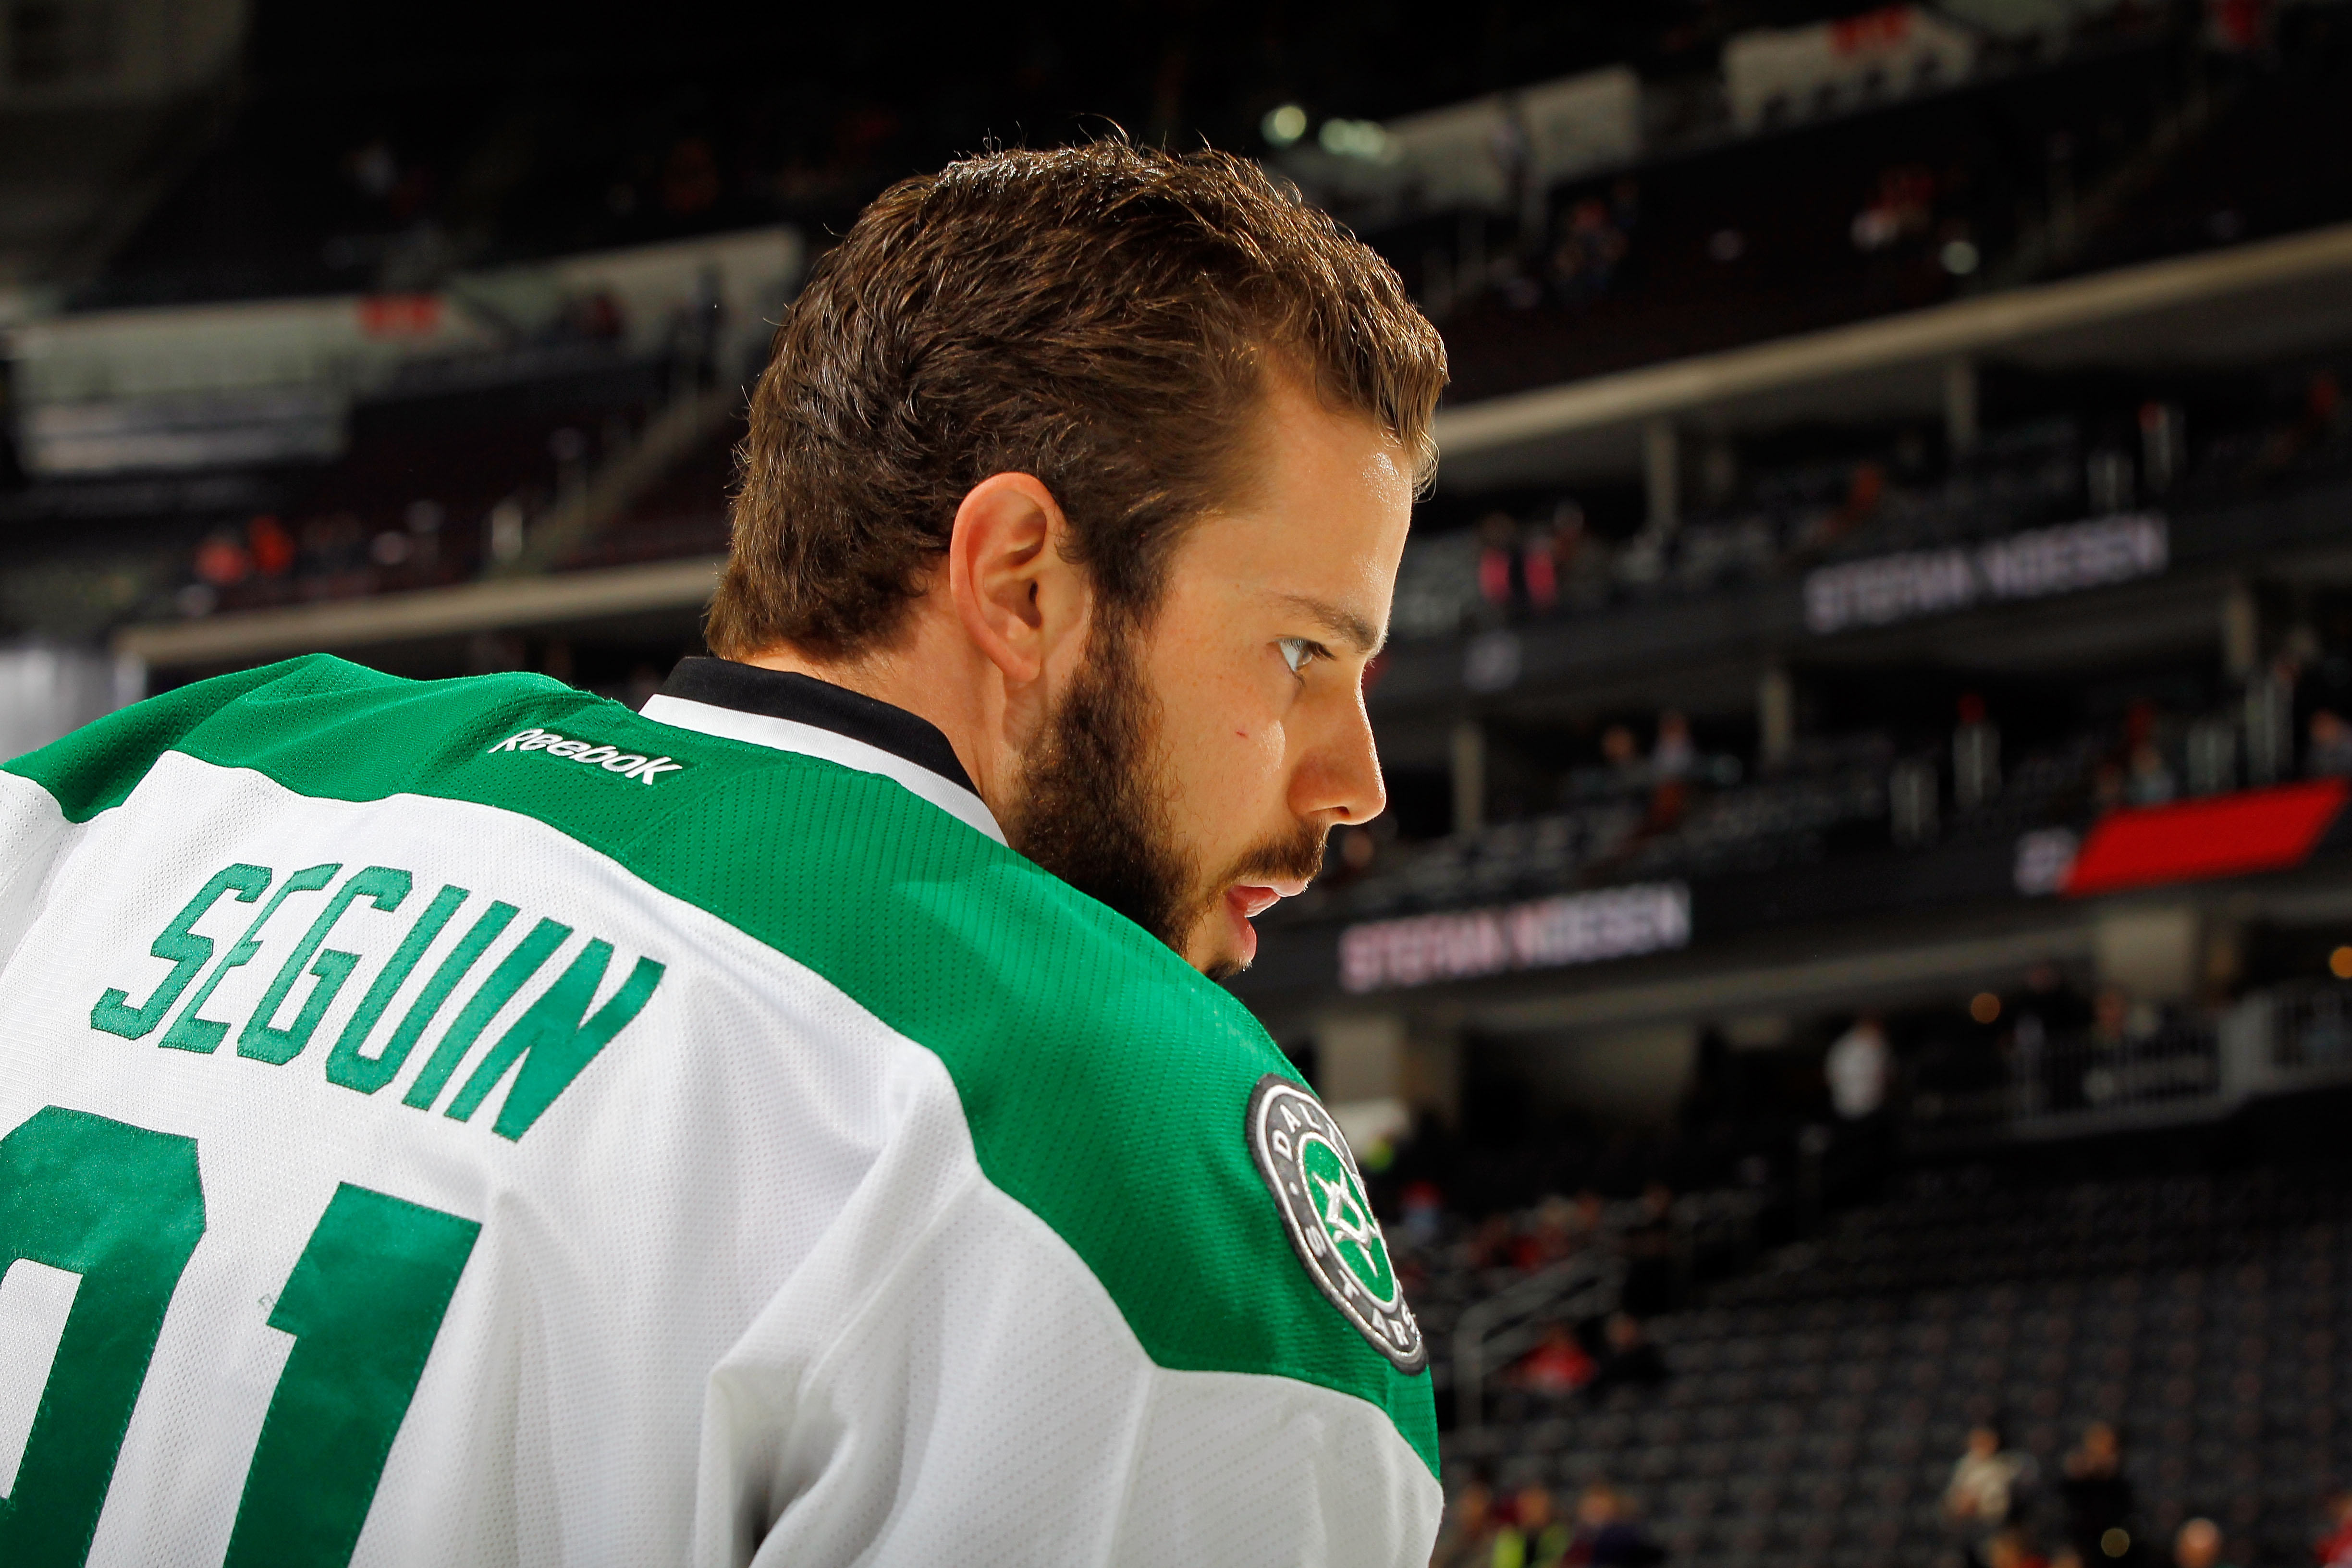 Stars star Tyler Seguin may have extra motivation vs.Panthers